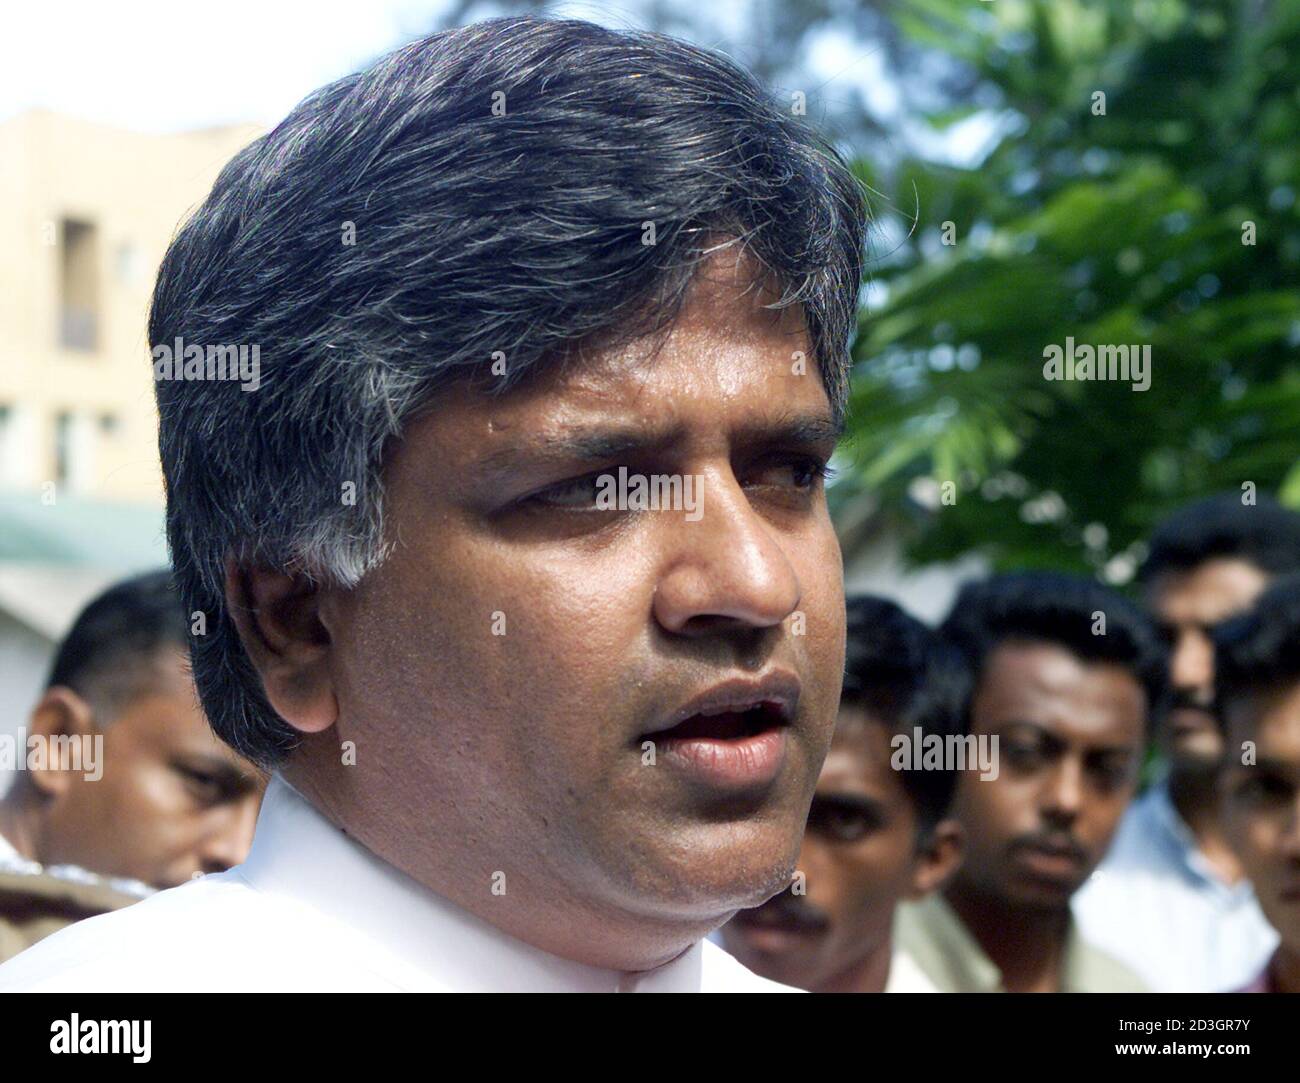 World Cup winning former Sri Lankan captain Arjuna Ranatunga walks into where the Board of Control for Cricket in Sri Lanka (BCCSL) elections are being held in Colombo on June 6, 2003. Former Sri Lanka cricket board (BCCSL) president Thilanga Sumathipala is favourite to return to the post after the first elections in three years on Friday. Captain of Sri Lanka's 1996 World Cup winning team, Arjuna Ranatunga, is standing against Sumathipala for the presidency. REUTERS/Anuruddha Lokuhapuarachchi  AL/CP Stock Photo